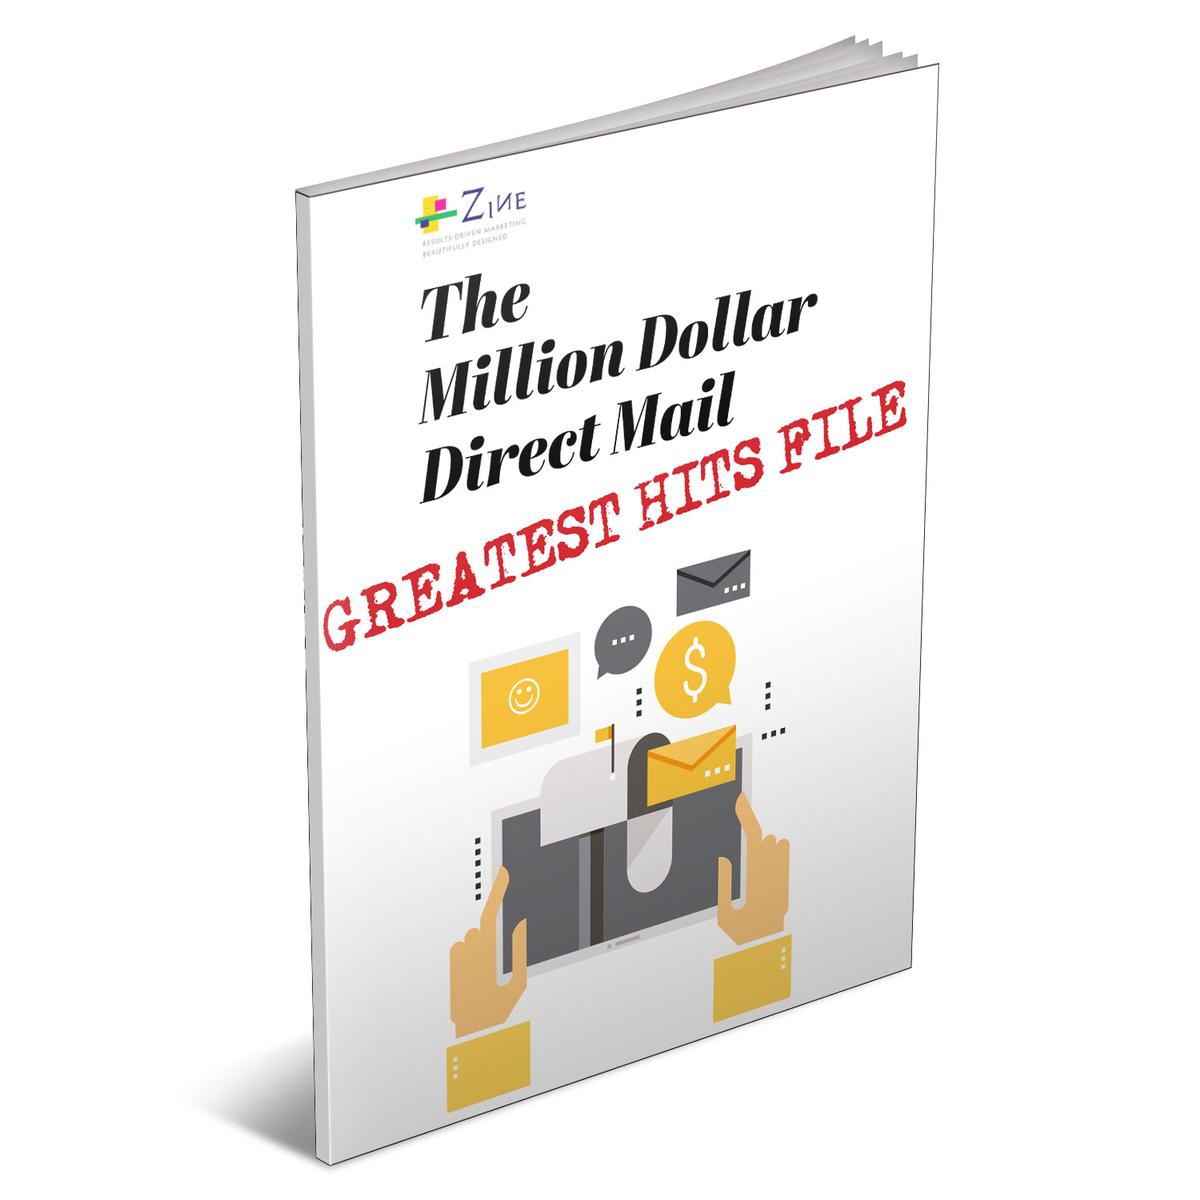 The Million Dollar Direct Mail Greatest Hits File